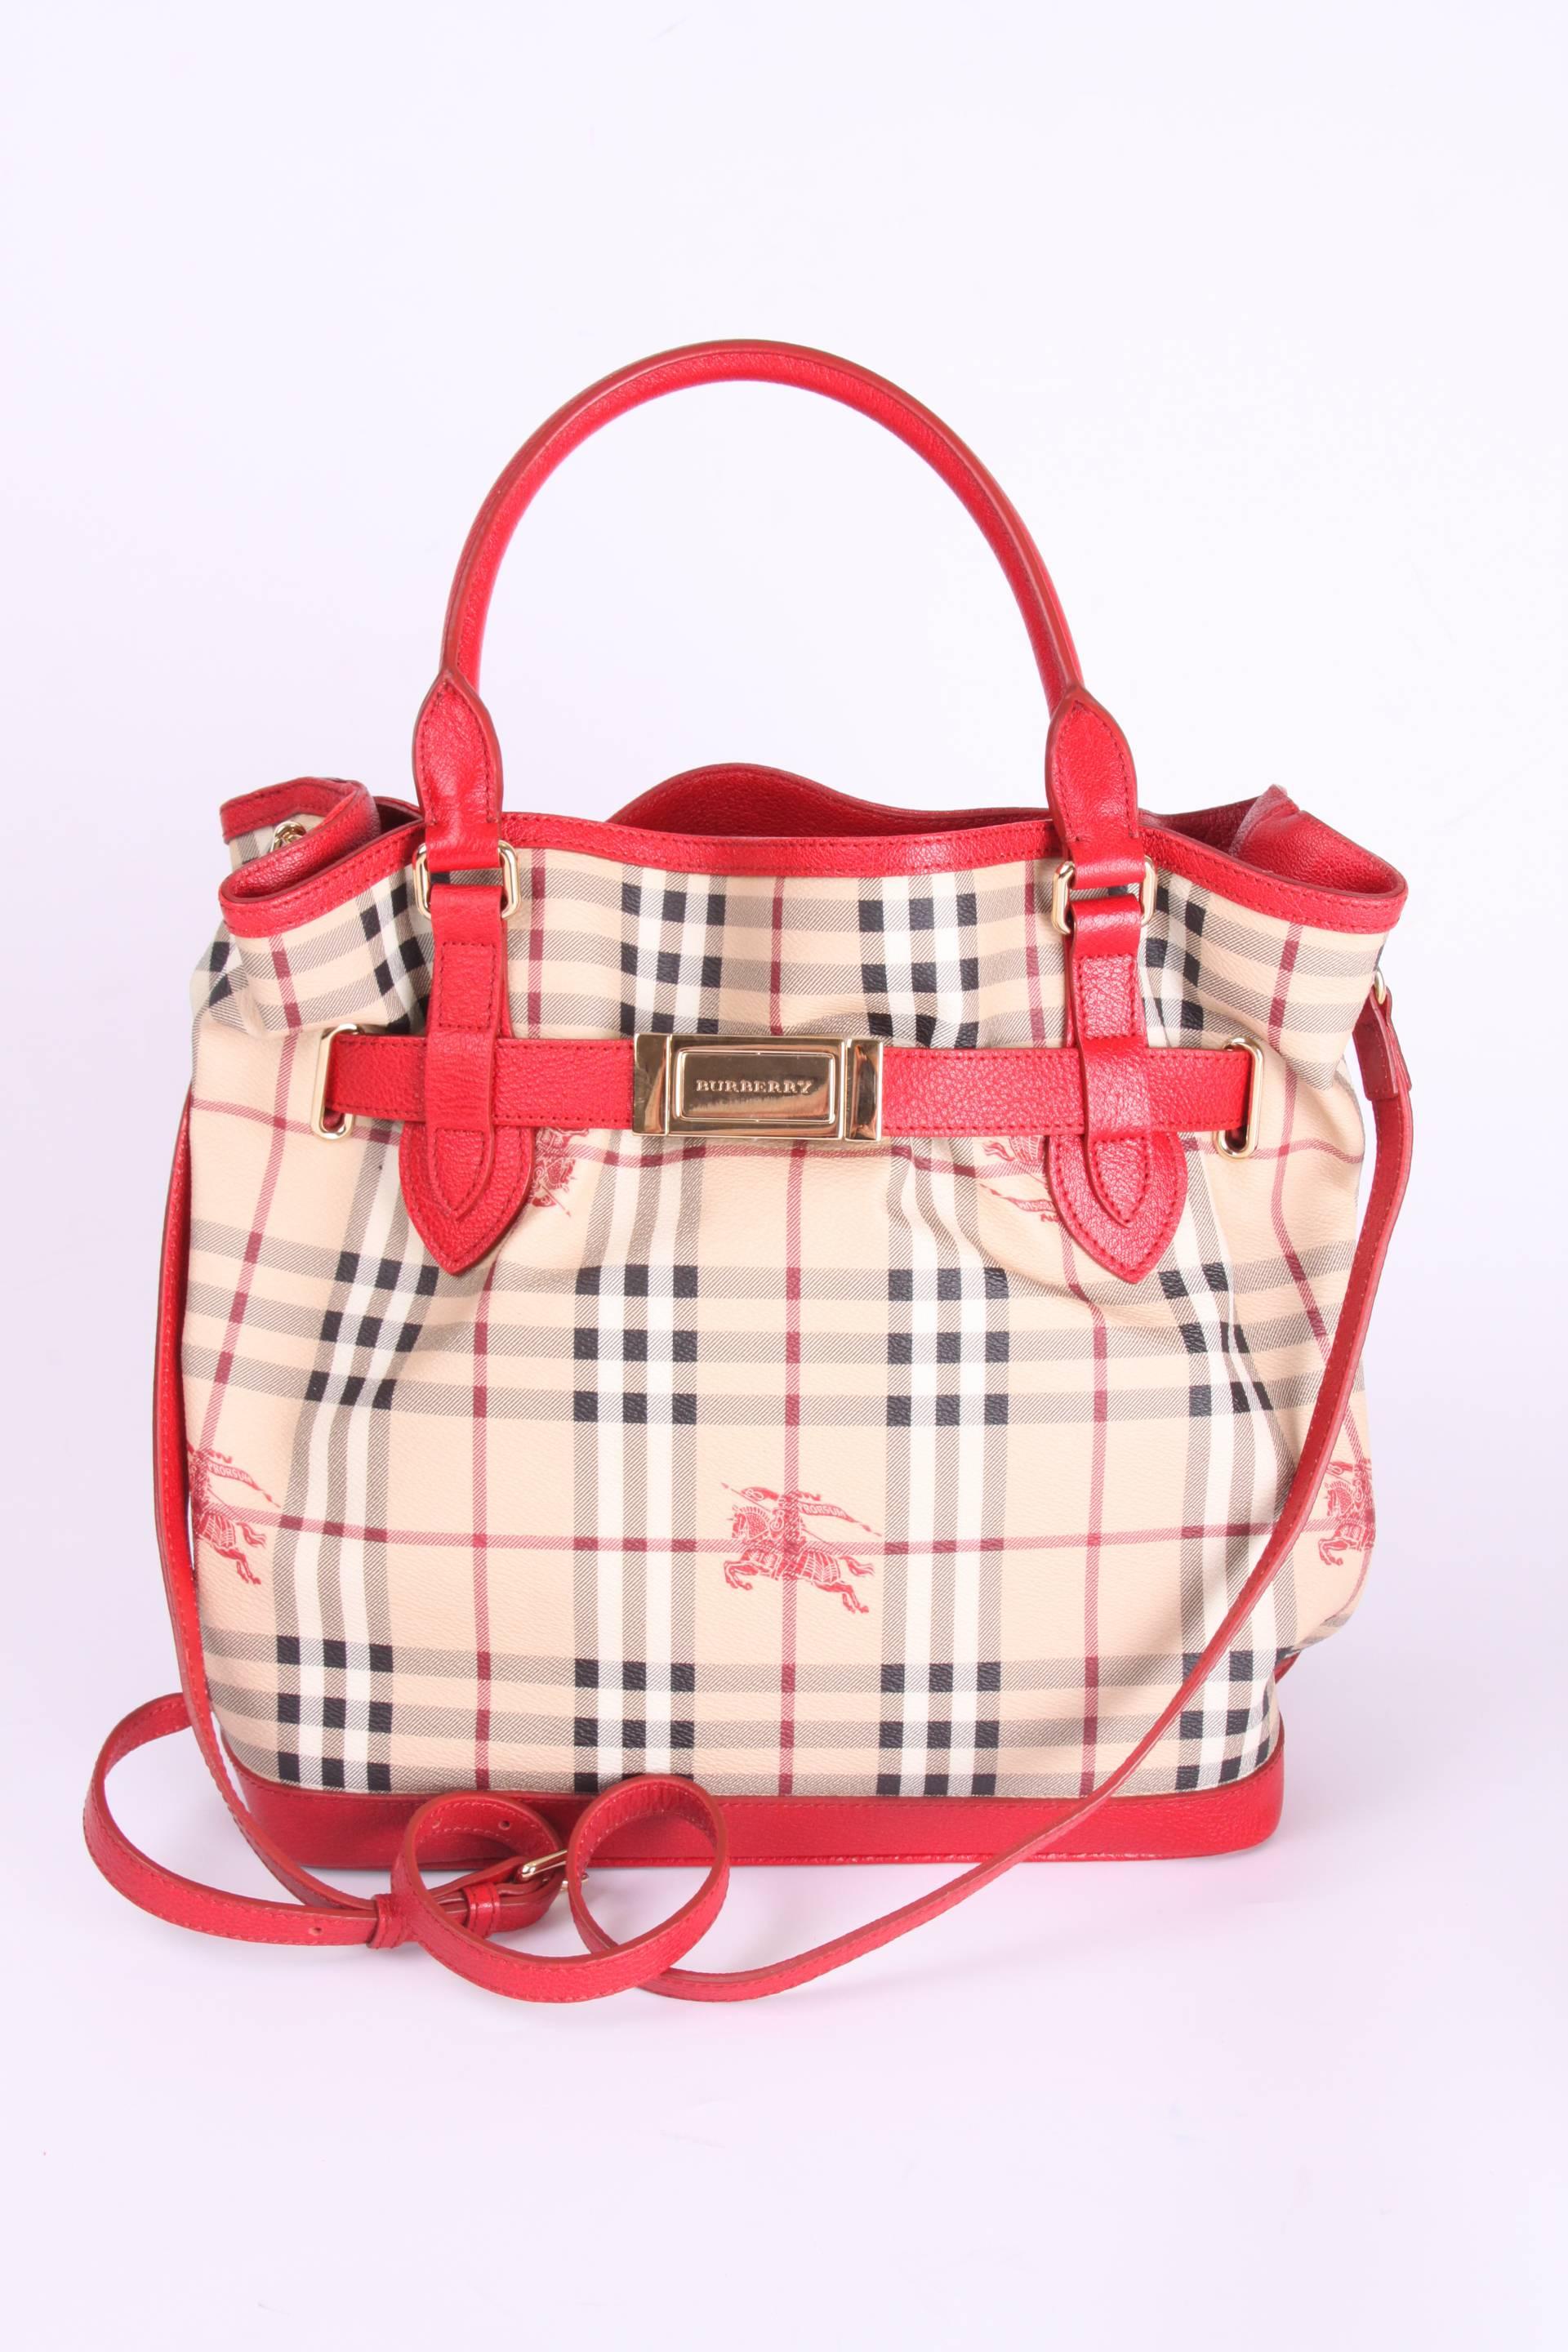 Women's Burberry Checkered Top Handle Bag - red/beige/black/white